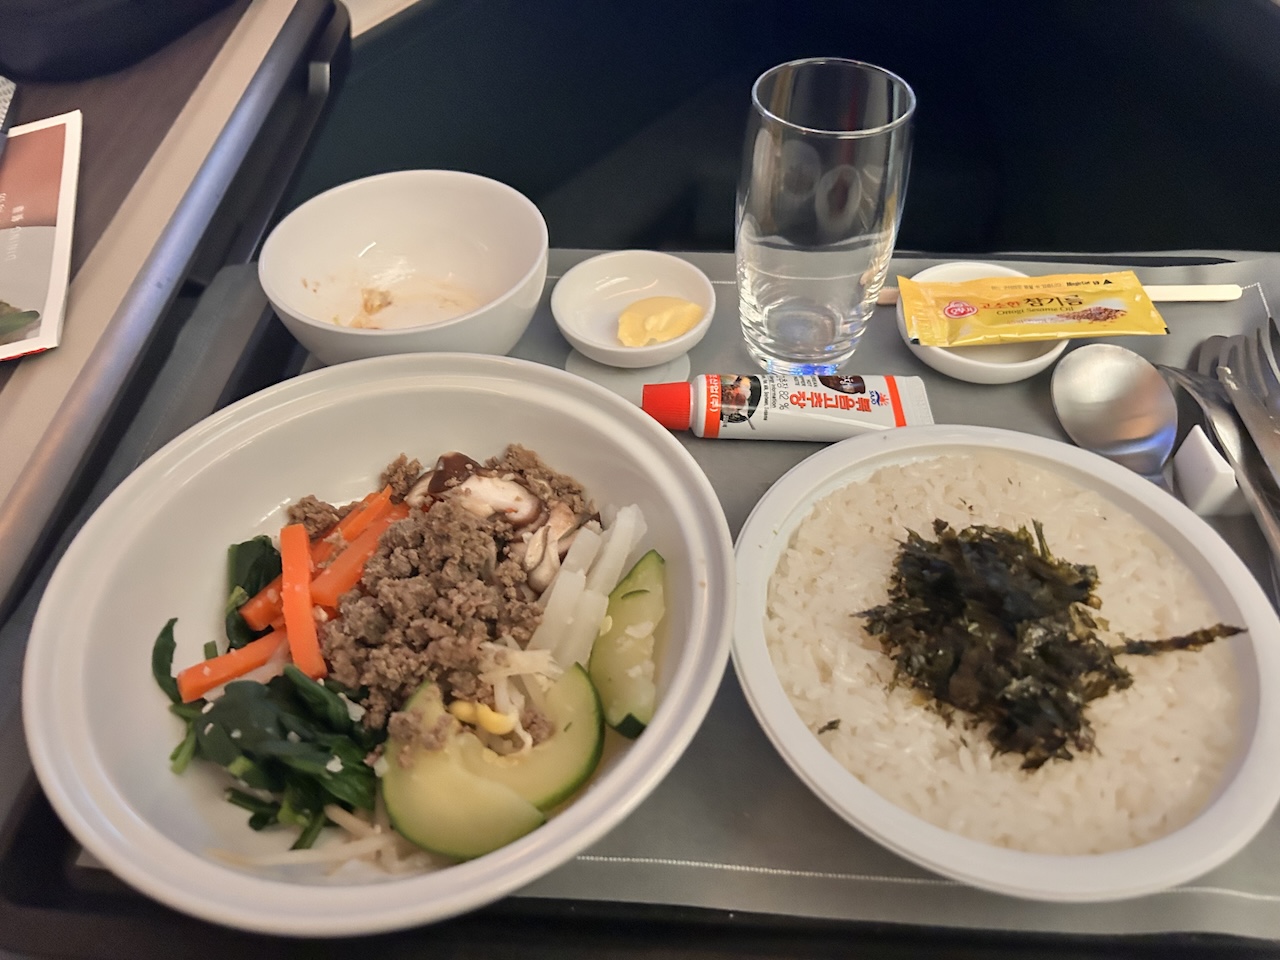 We review Cathay Pacific's A350 long-haul business class on a recent flight between Hong Kong and Seoul.